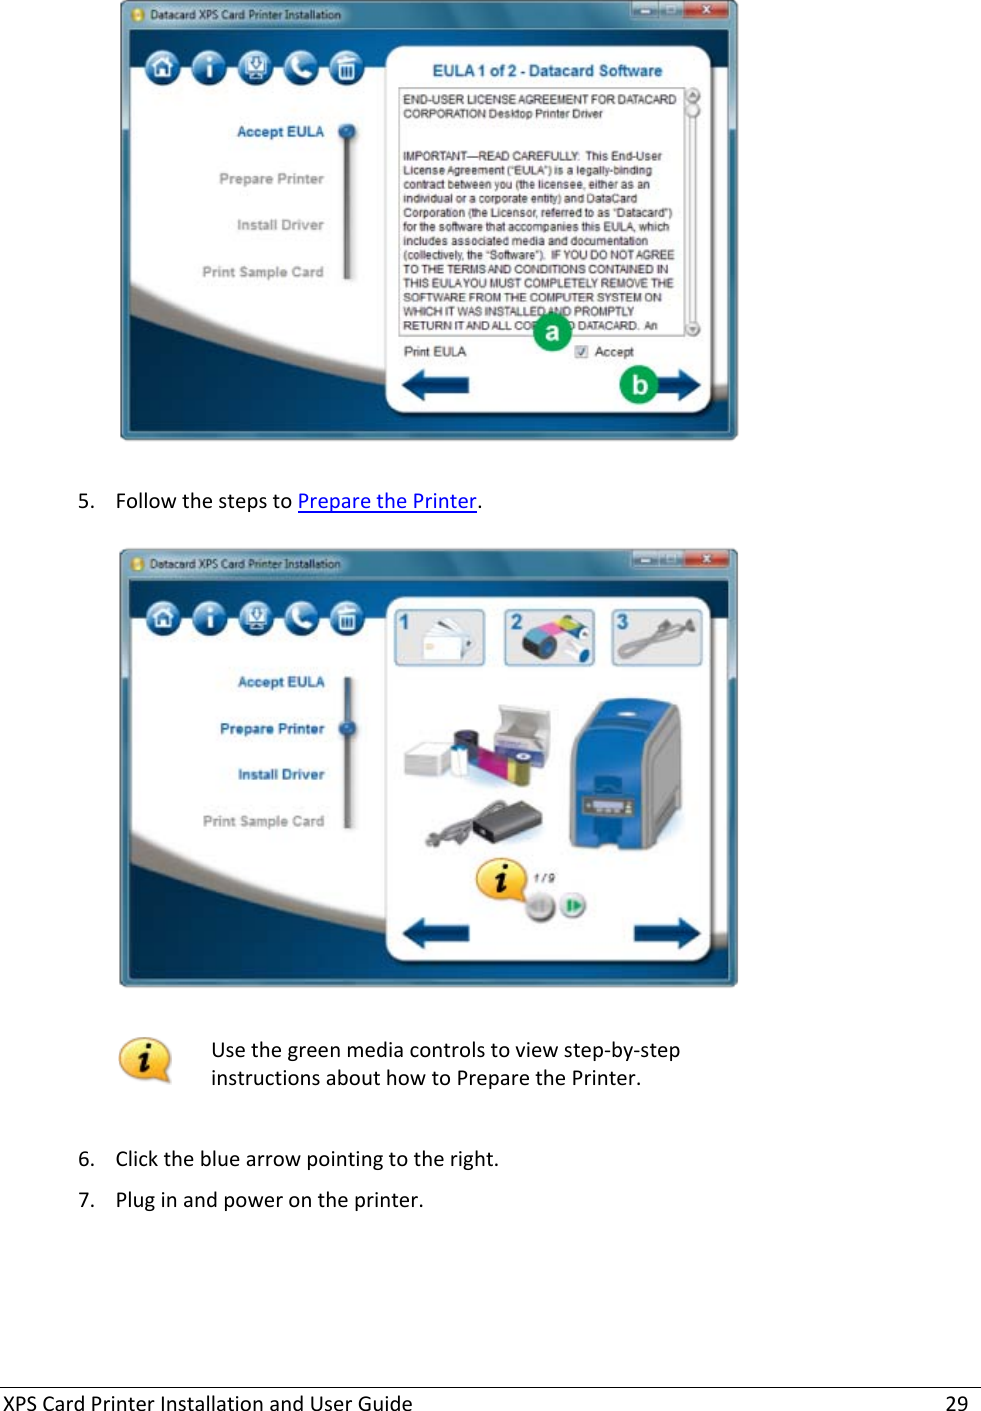 XPS Card Printer Installation and User Guide    29   5. Follow the steps to Prepare the Printer.     Use the green media controls to view step-by-step instructions about how to Prepare the Printer.  6. Click the blue arrow pointing to the right.  7. Plug in and power on the printer.   